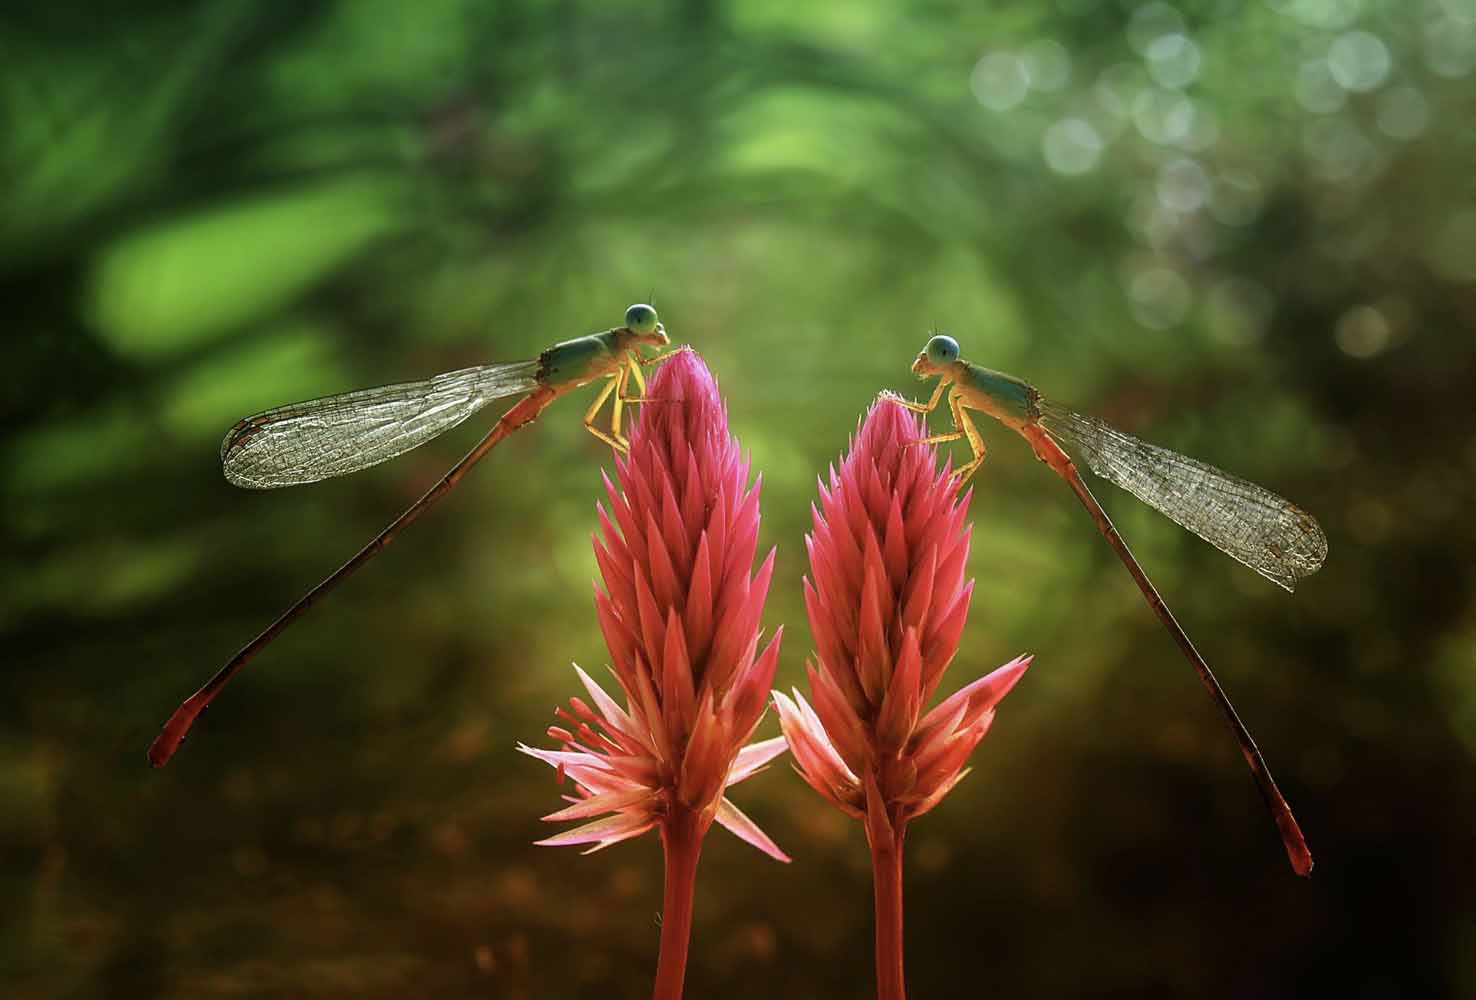 Two damselflies sitting on top of 2 pink flowers on a blurred green background